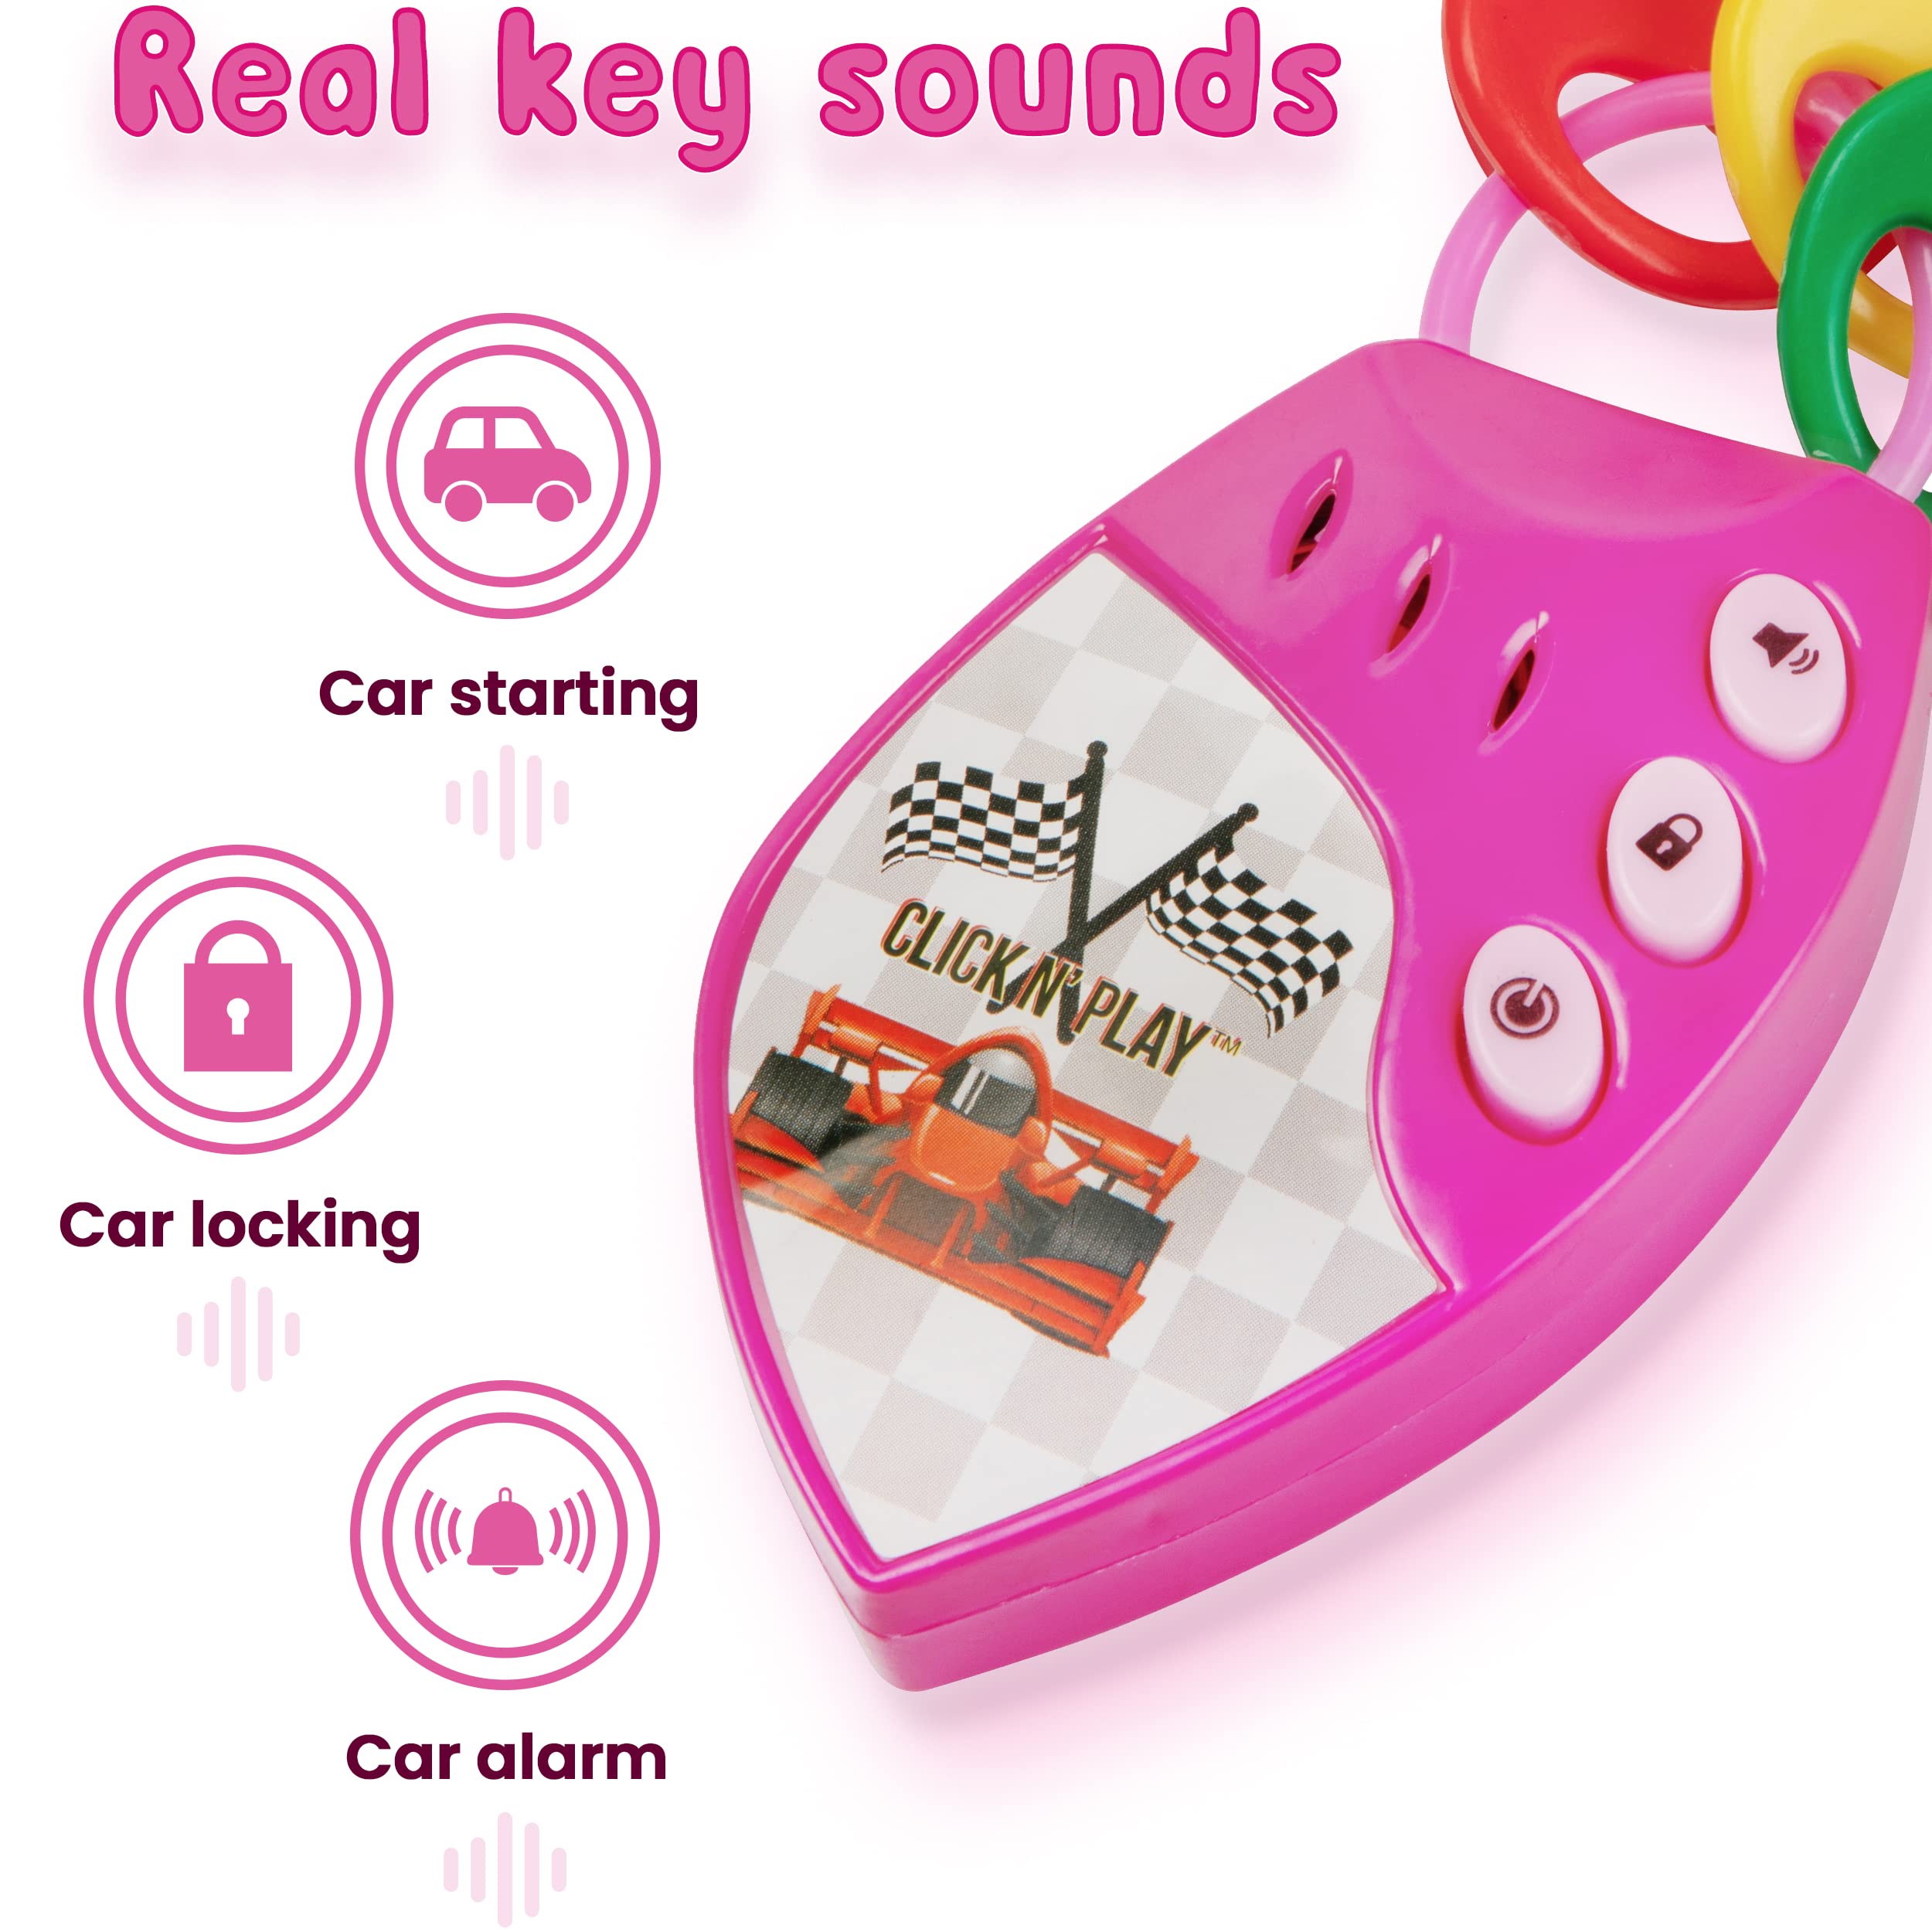 Click N' Play Purse Toy for Girls 2-3 Years Old - Toddler Girl Toys - Handbag with 8 Pieces Accessories: Makeup, Smartphone, Wallet, Keys, Credit Card - Toys for 2-3 Year-Old-Girls Toddler (Pink)